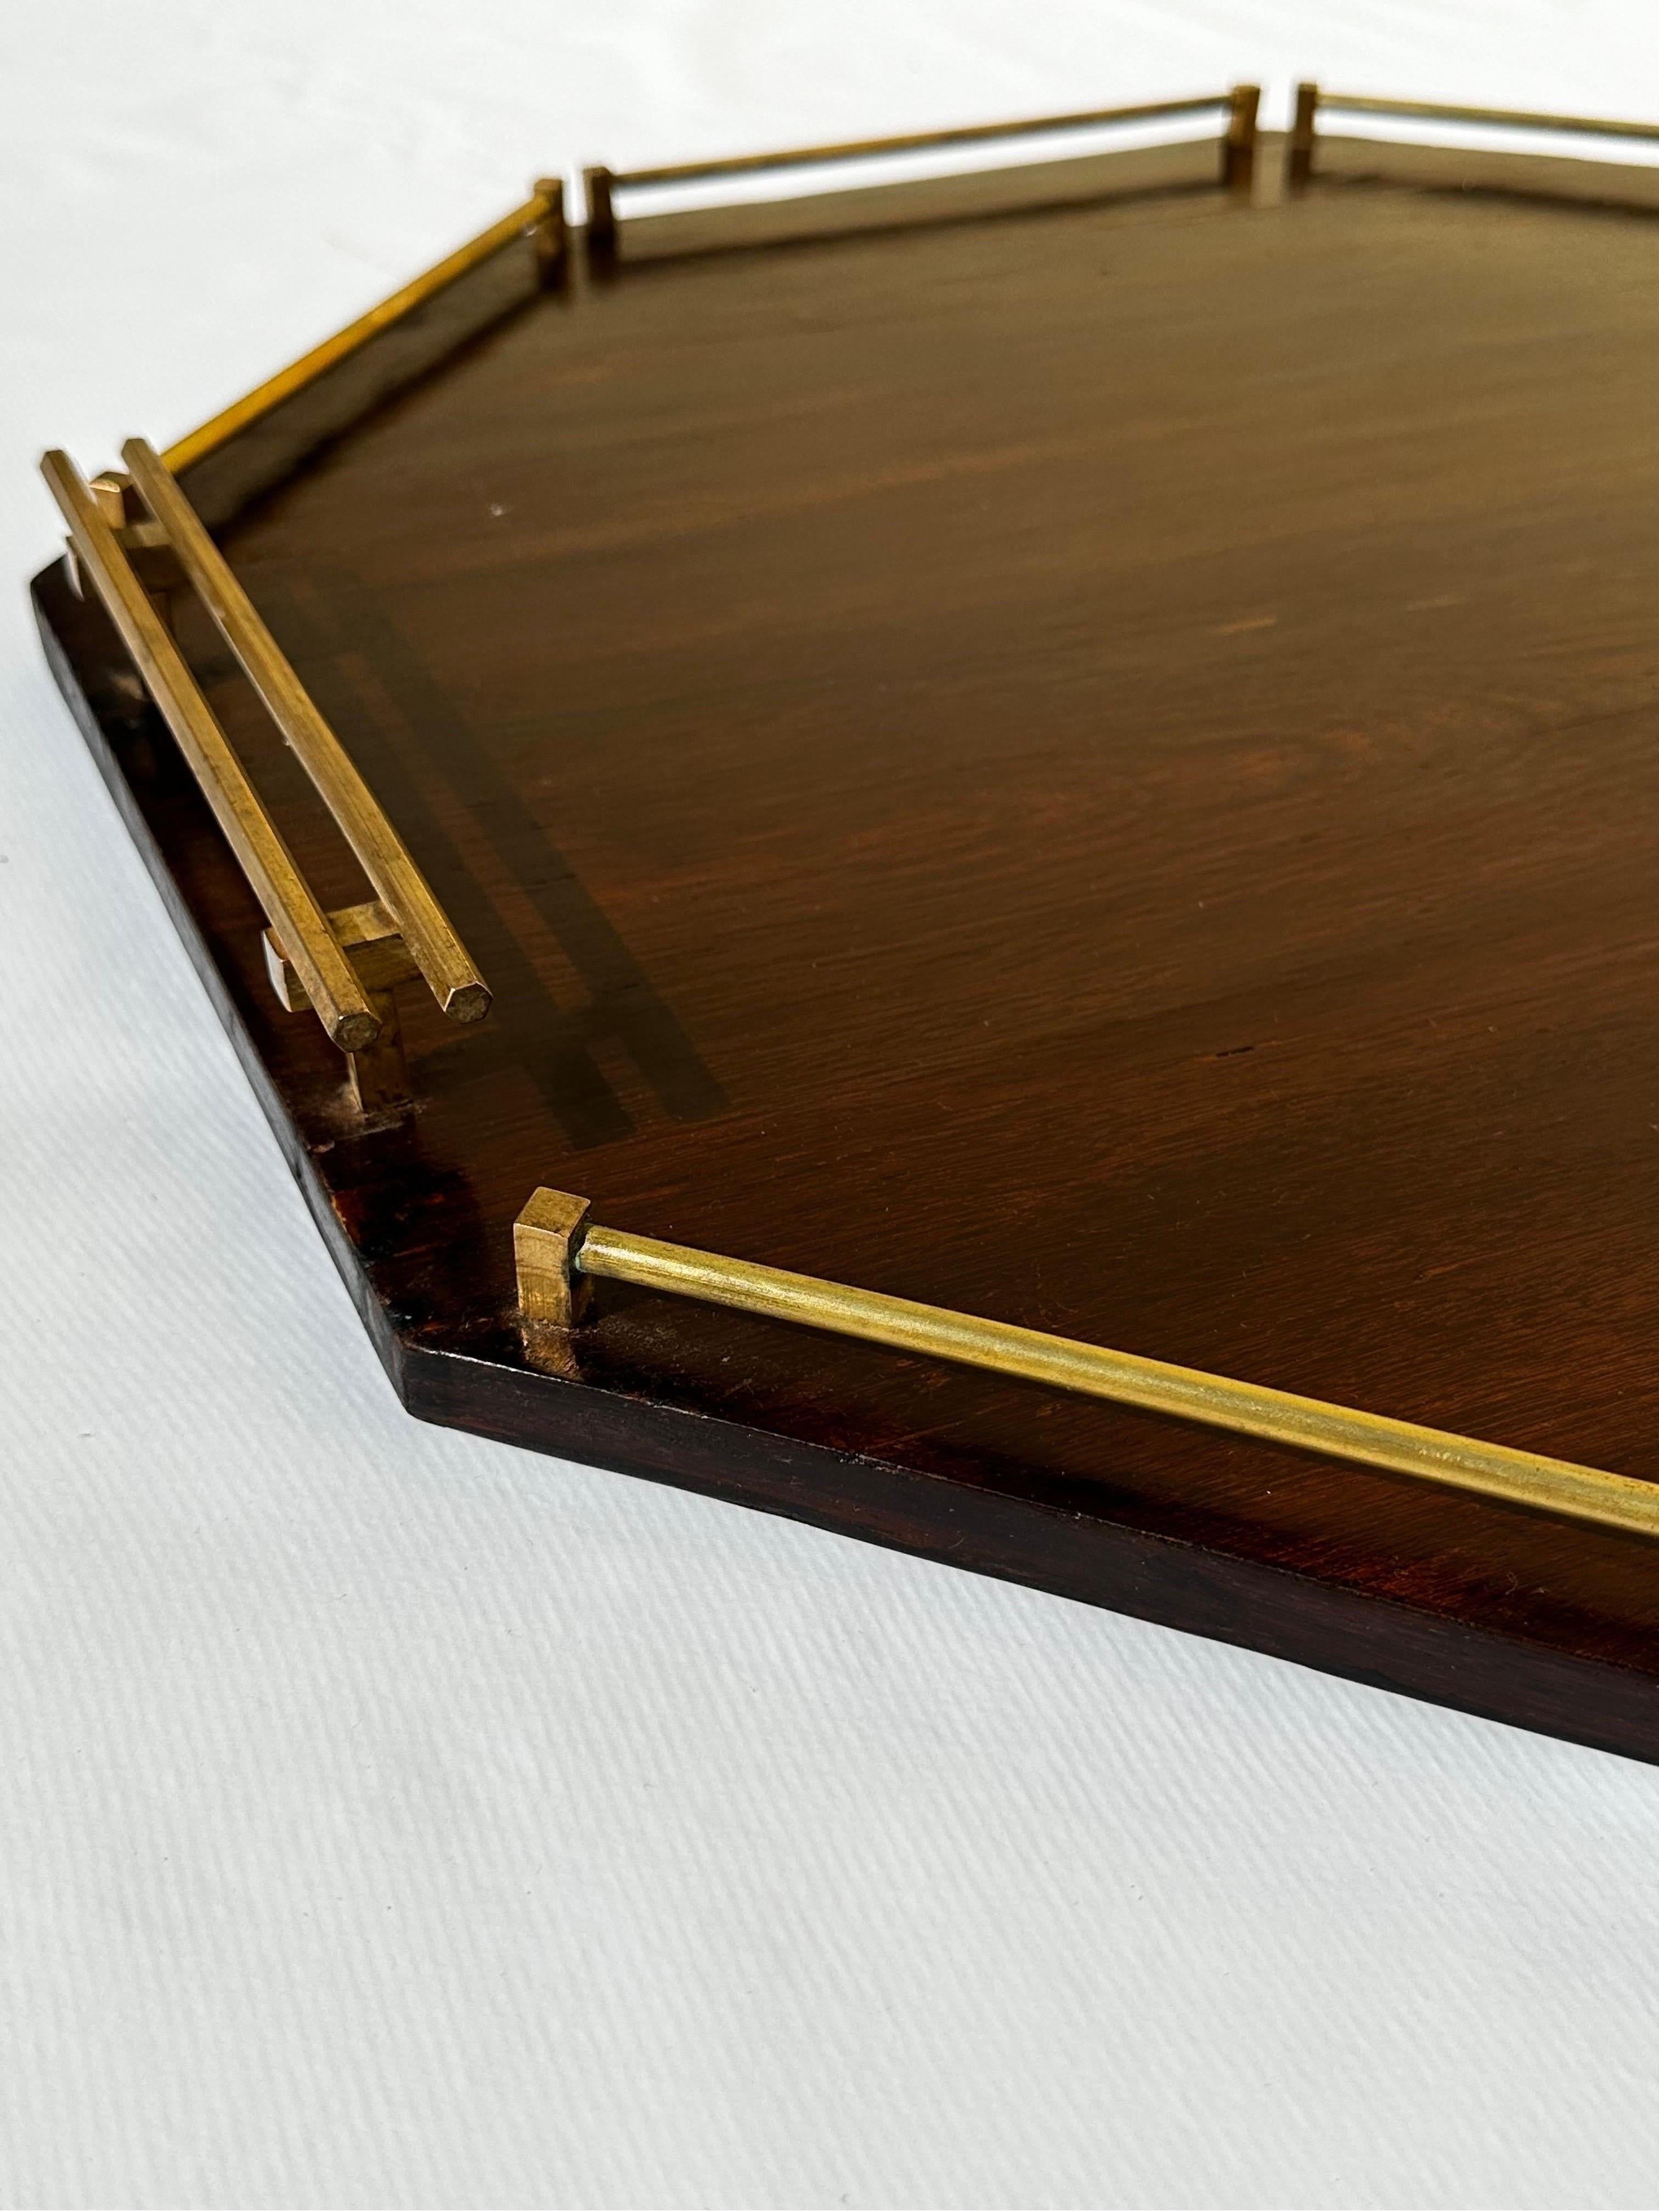 Brazilian Midcentury Jacarandá Rosewood and Brass Serving Tray, 1960s For Sale 2